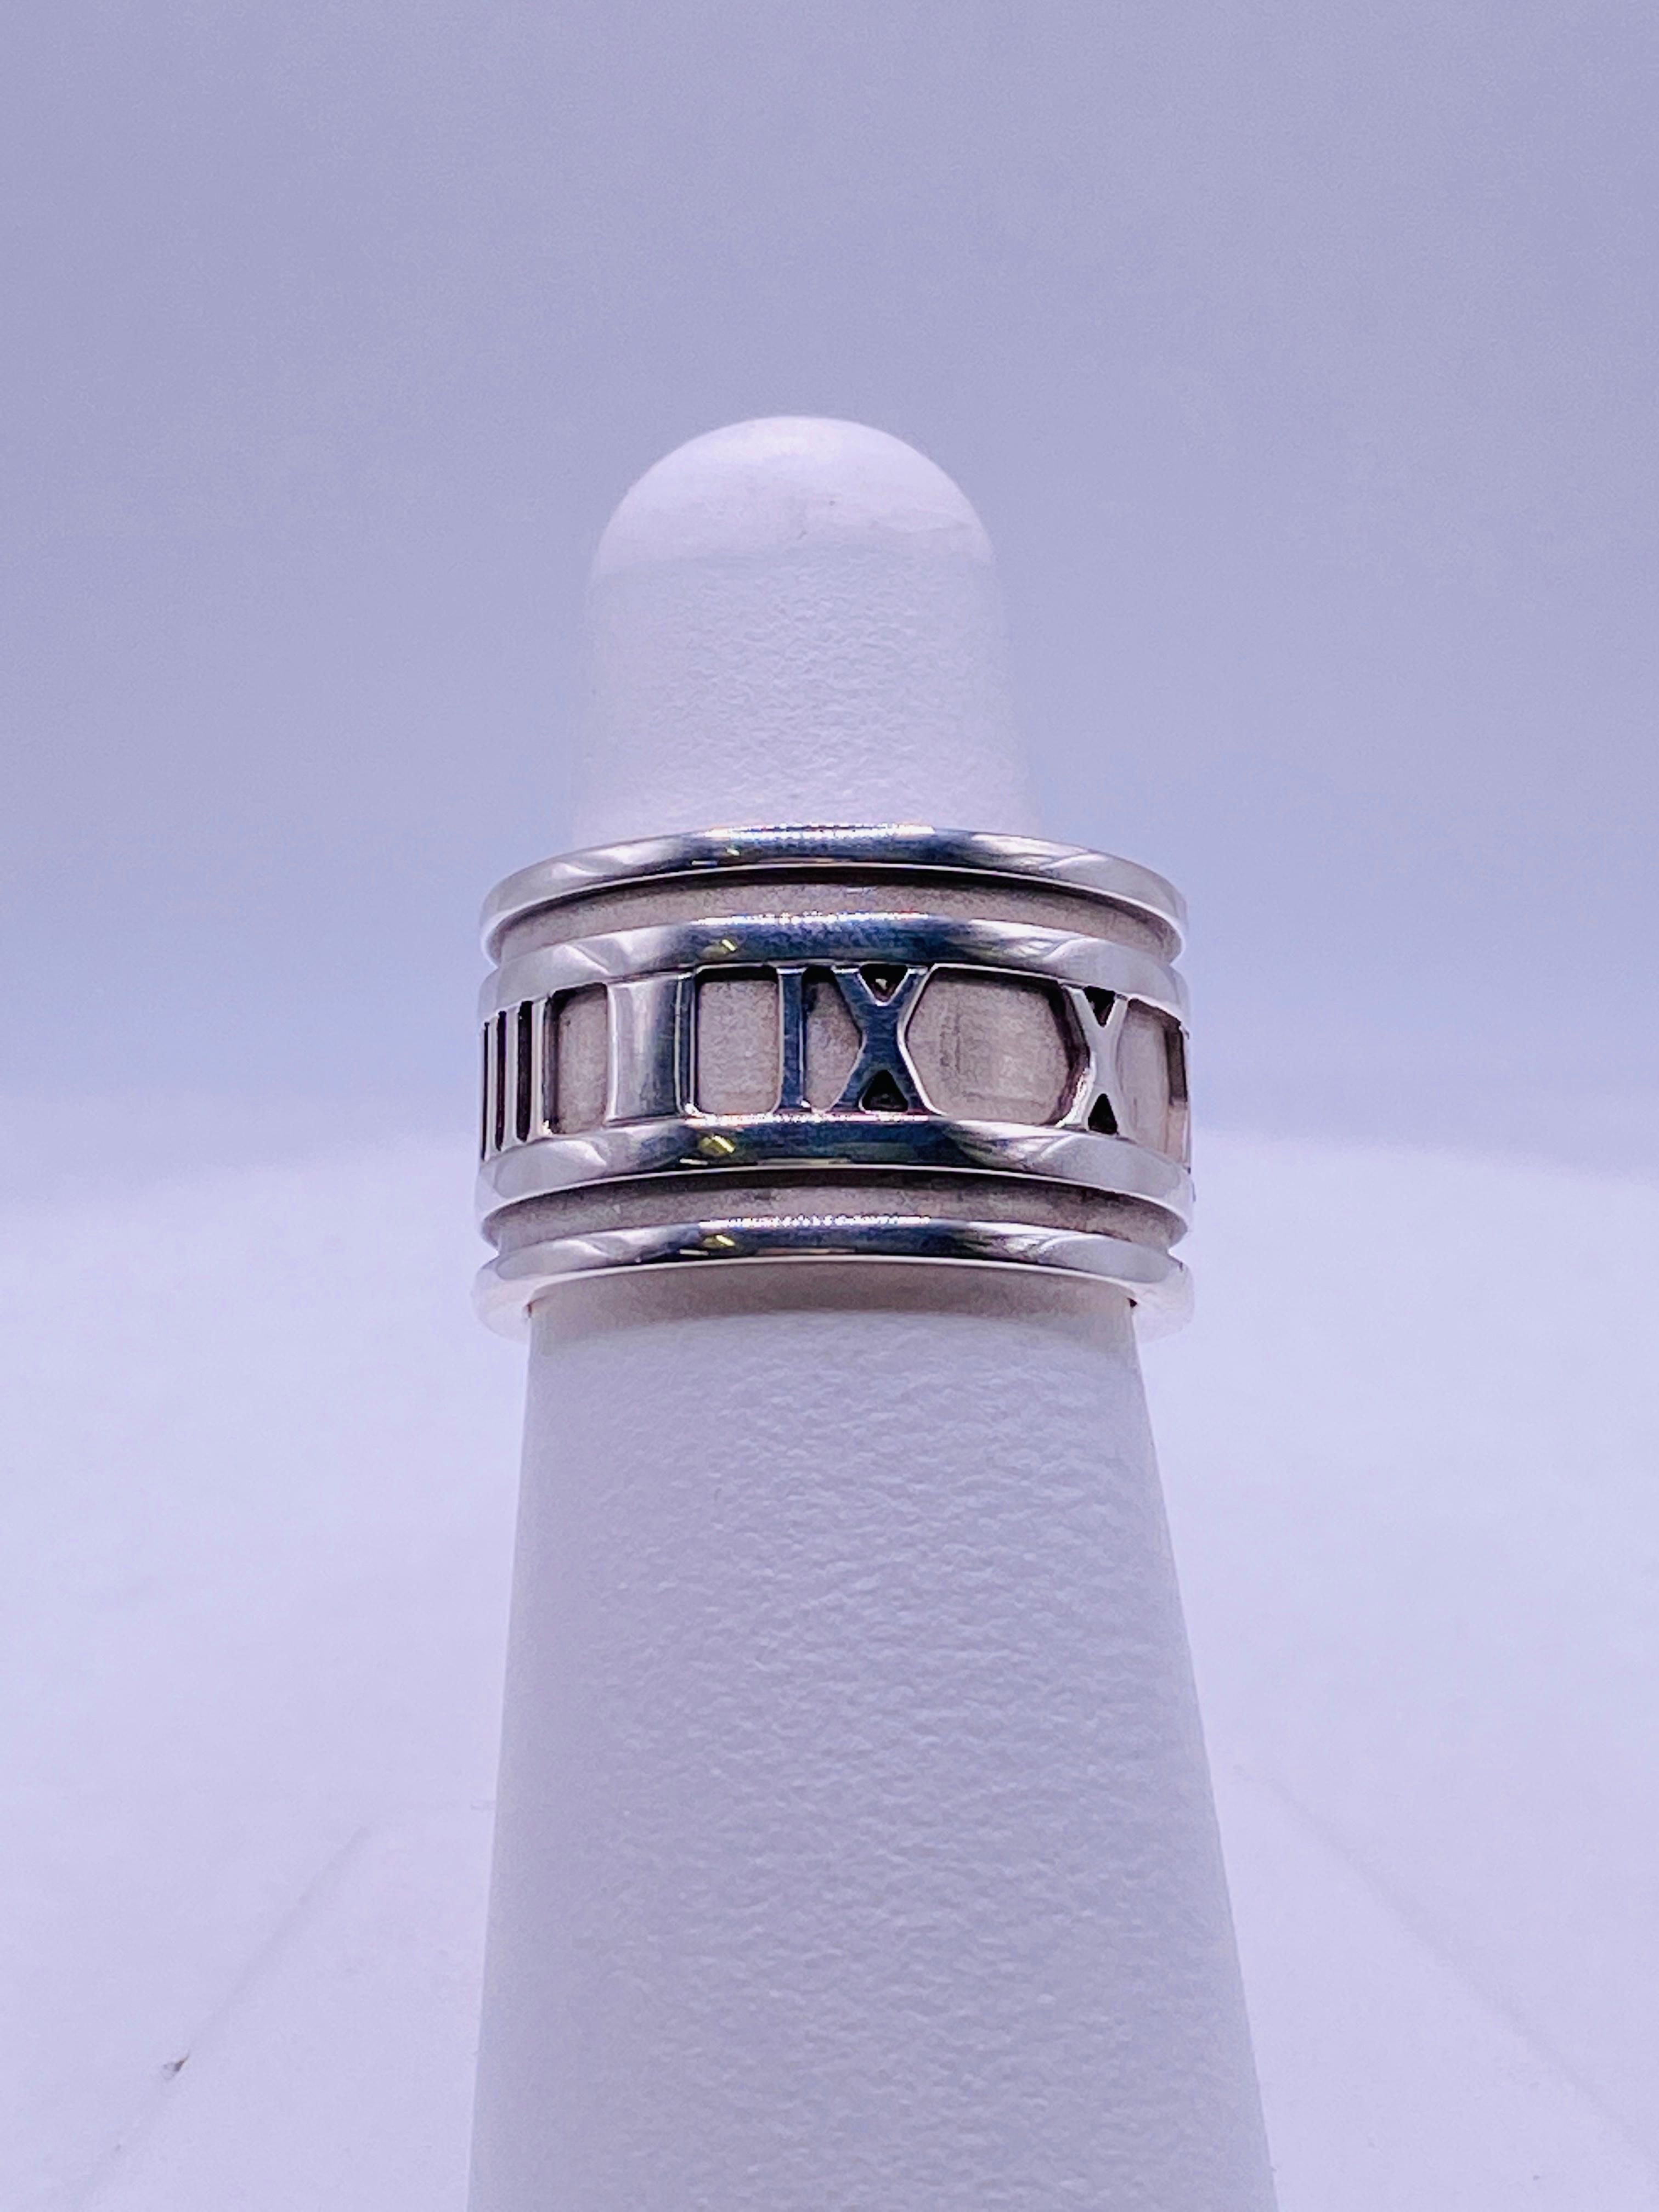 Tiffany & Co Sterling Silver Atlas Band Ring. Size 6 US